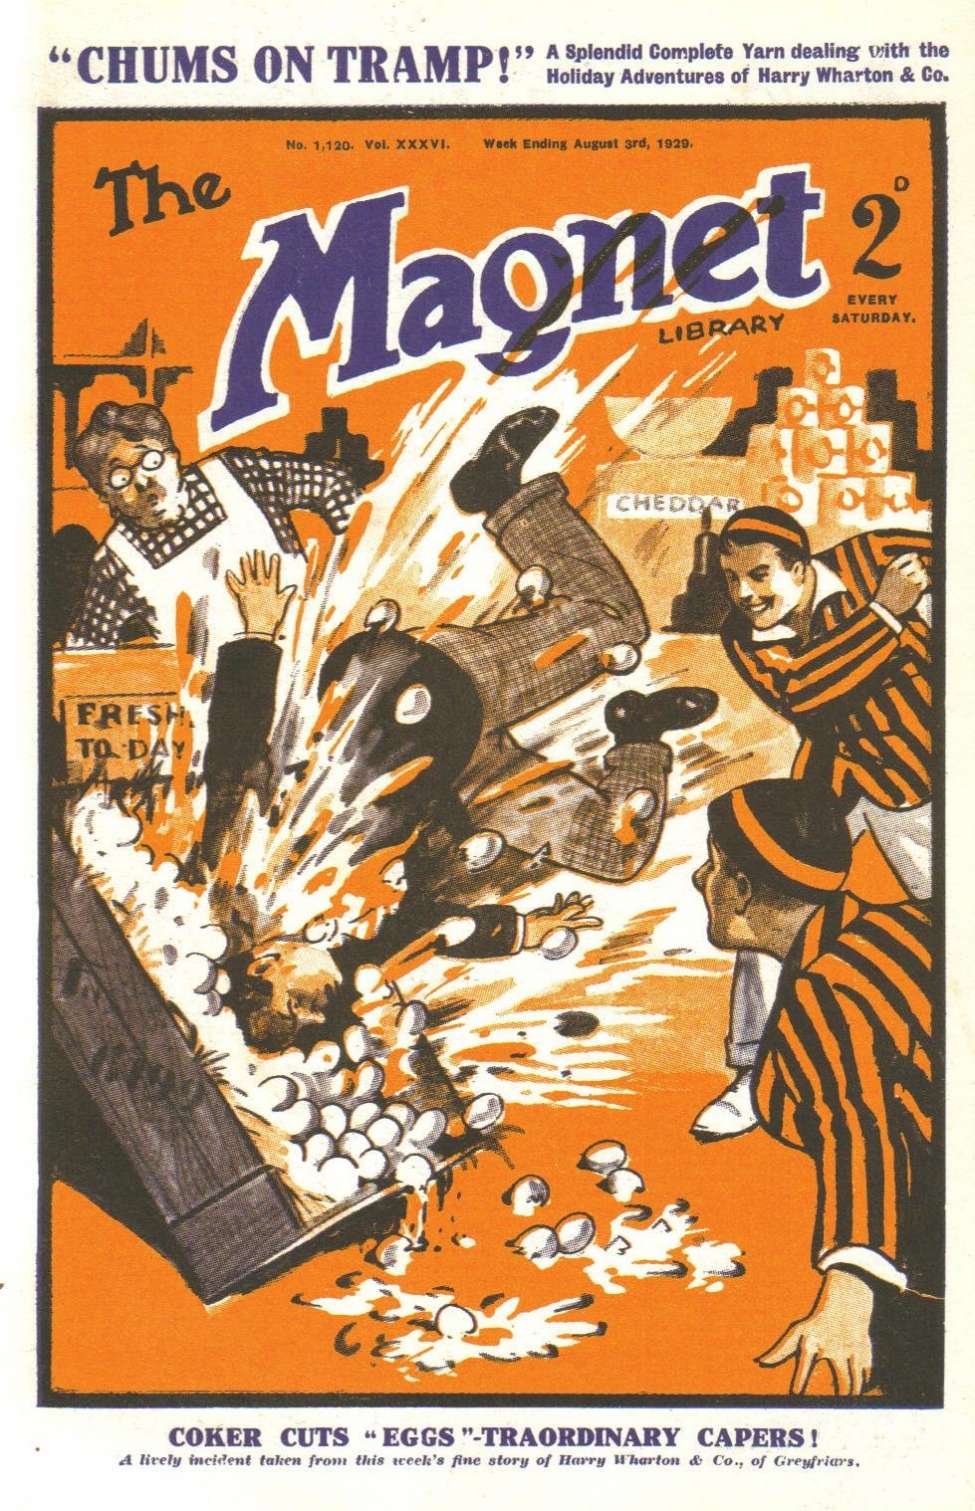 Book Cover For The Magnet 1120 - Chums on Tramp!